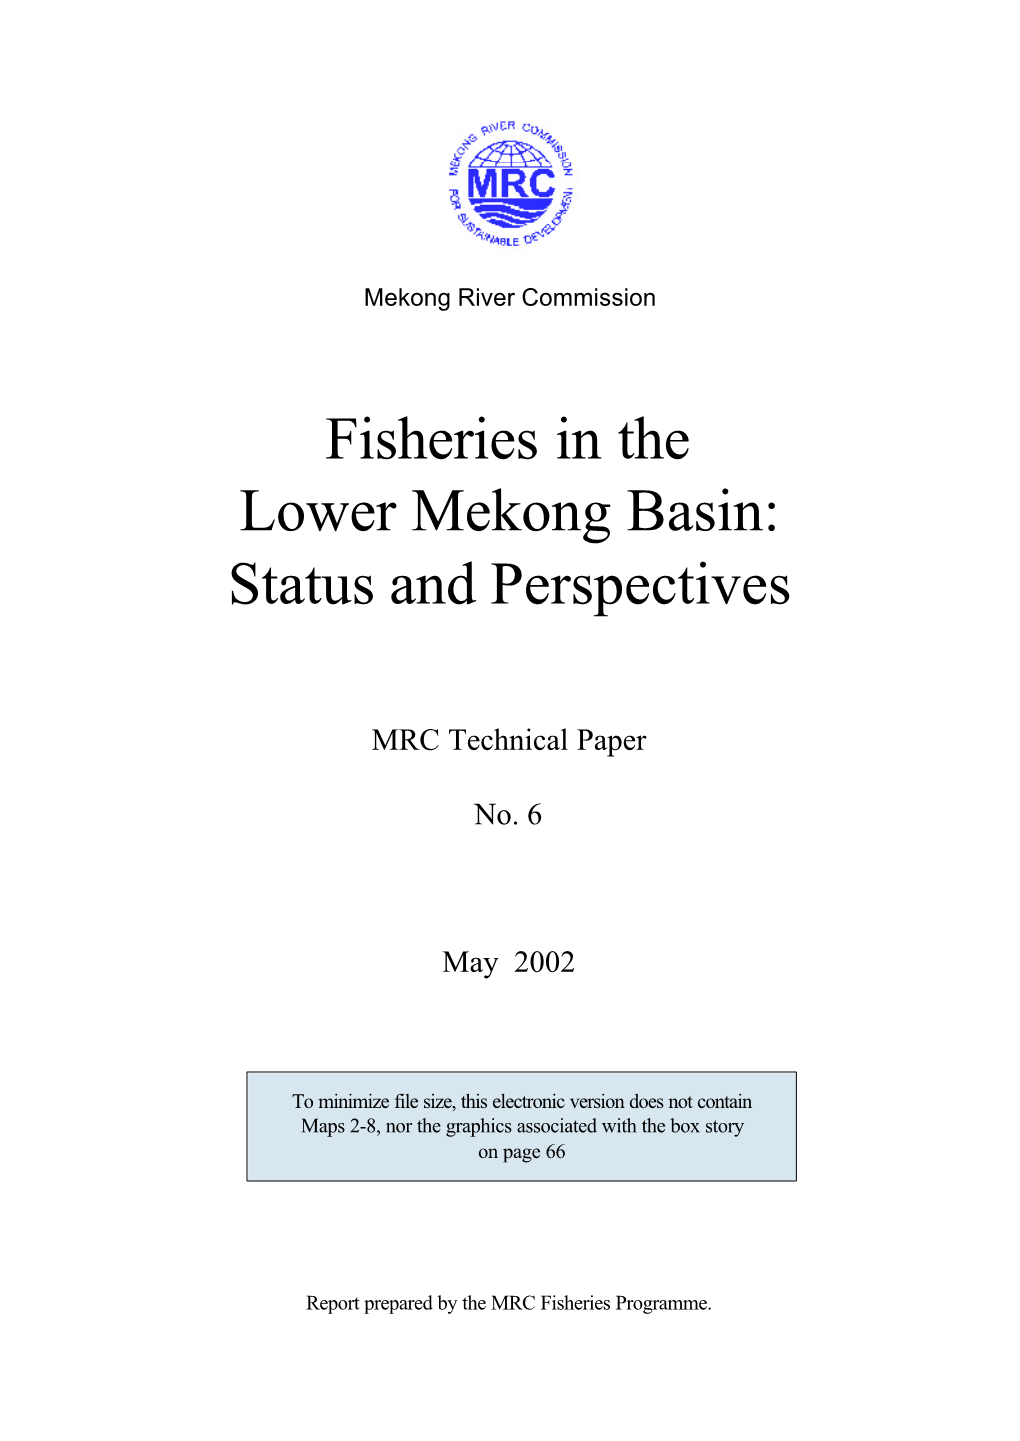 Fisheries in the Lower Mekong River Basin